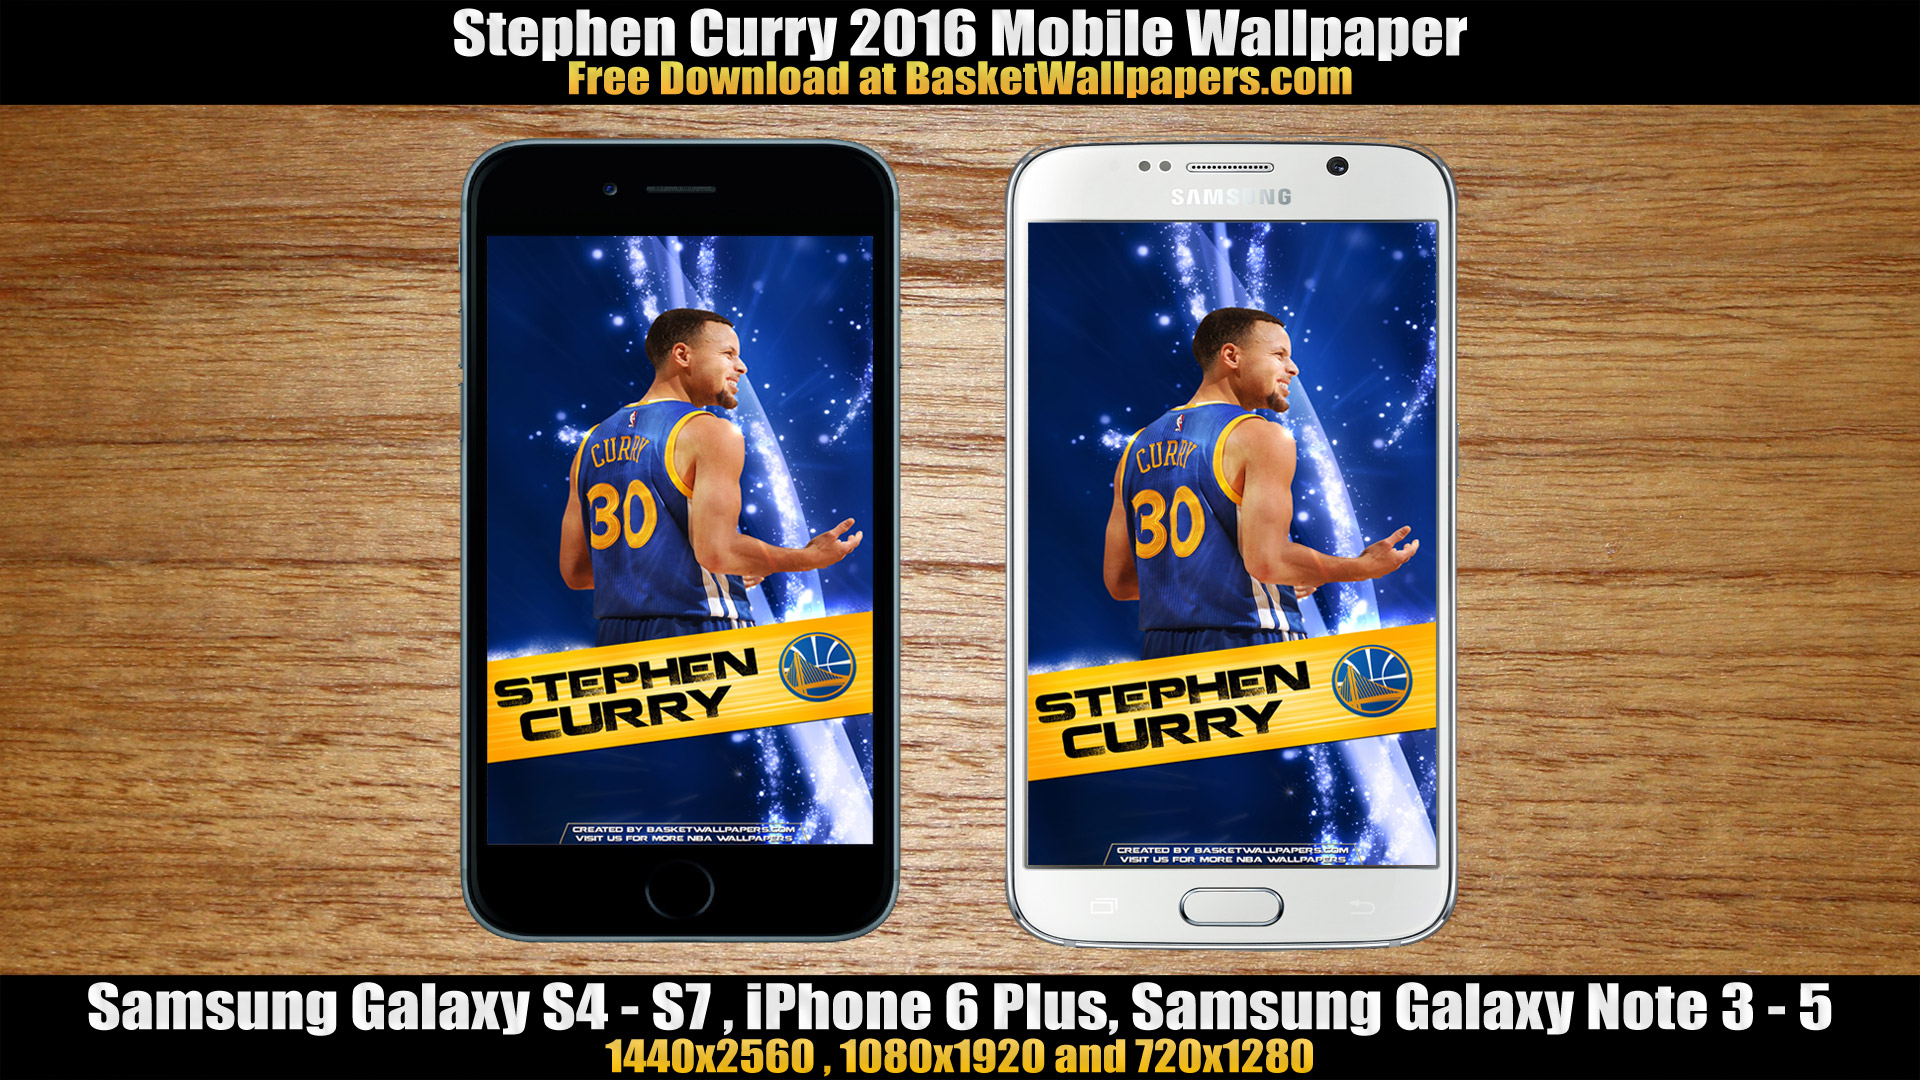 Stephen Curry Golden State Warriors 2016 Mobile Wallpaper